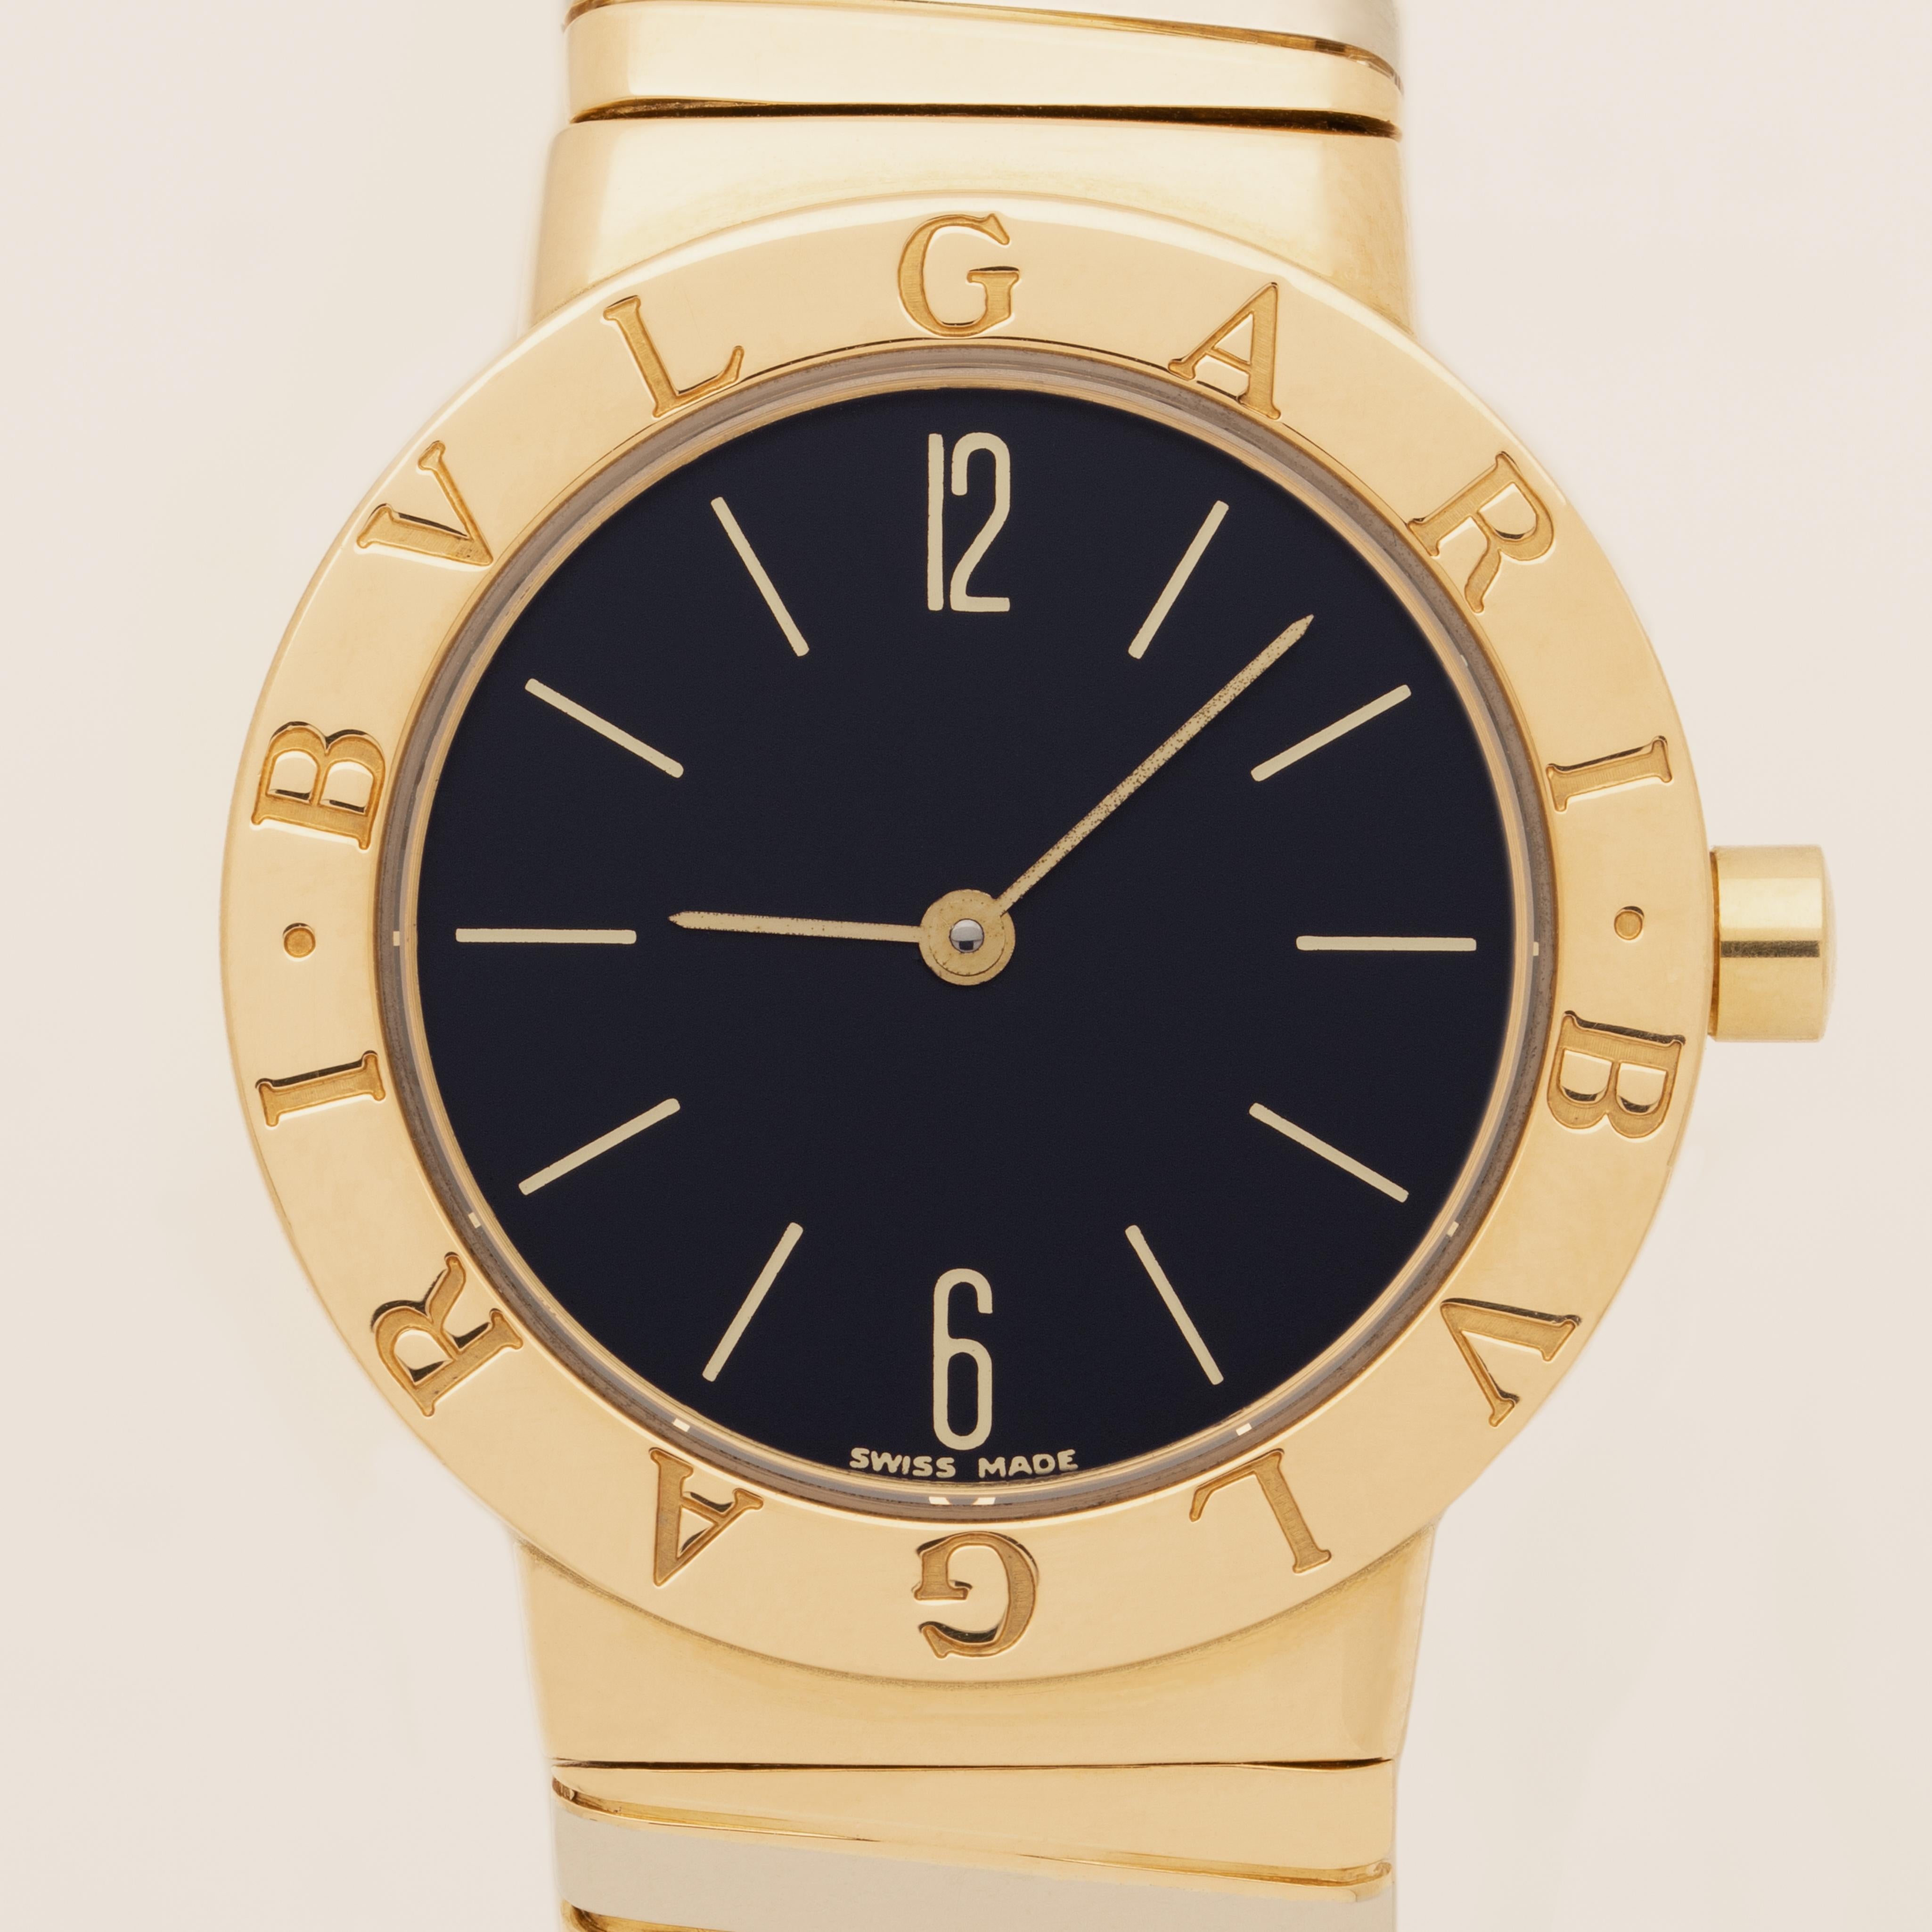 Bvlgari Bulgari  18 Karat Tri-Color Gold 
More Rare Large Dial Tubogas Watch model 	
BB 30 2T

30mm Dial - this model is more rare as they made fewer with this larger dial size
Quartz Movement
Guaranteed Authentic 

Stephanie Windsor guarantees the